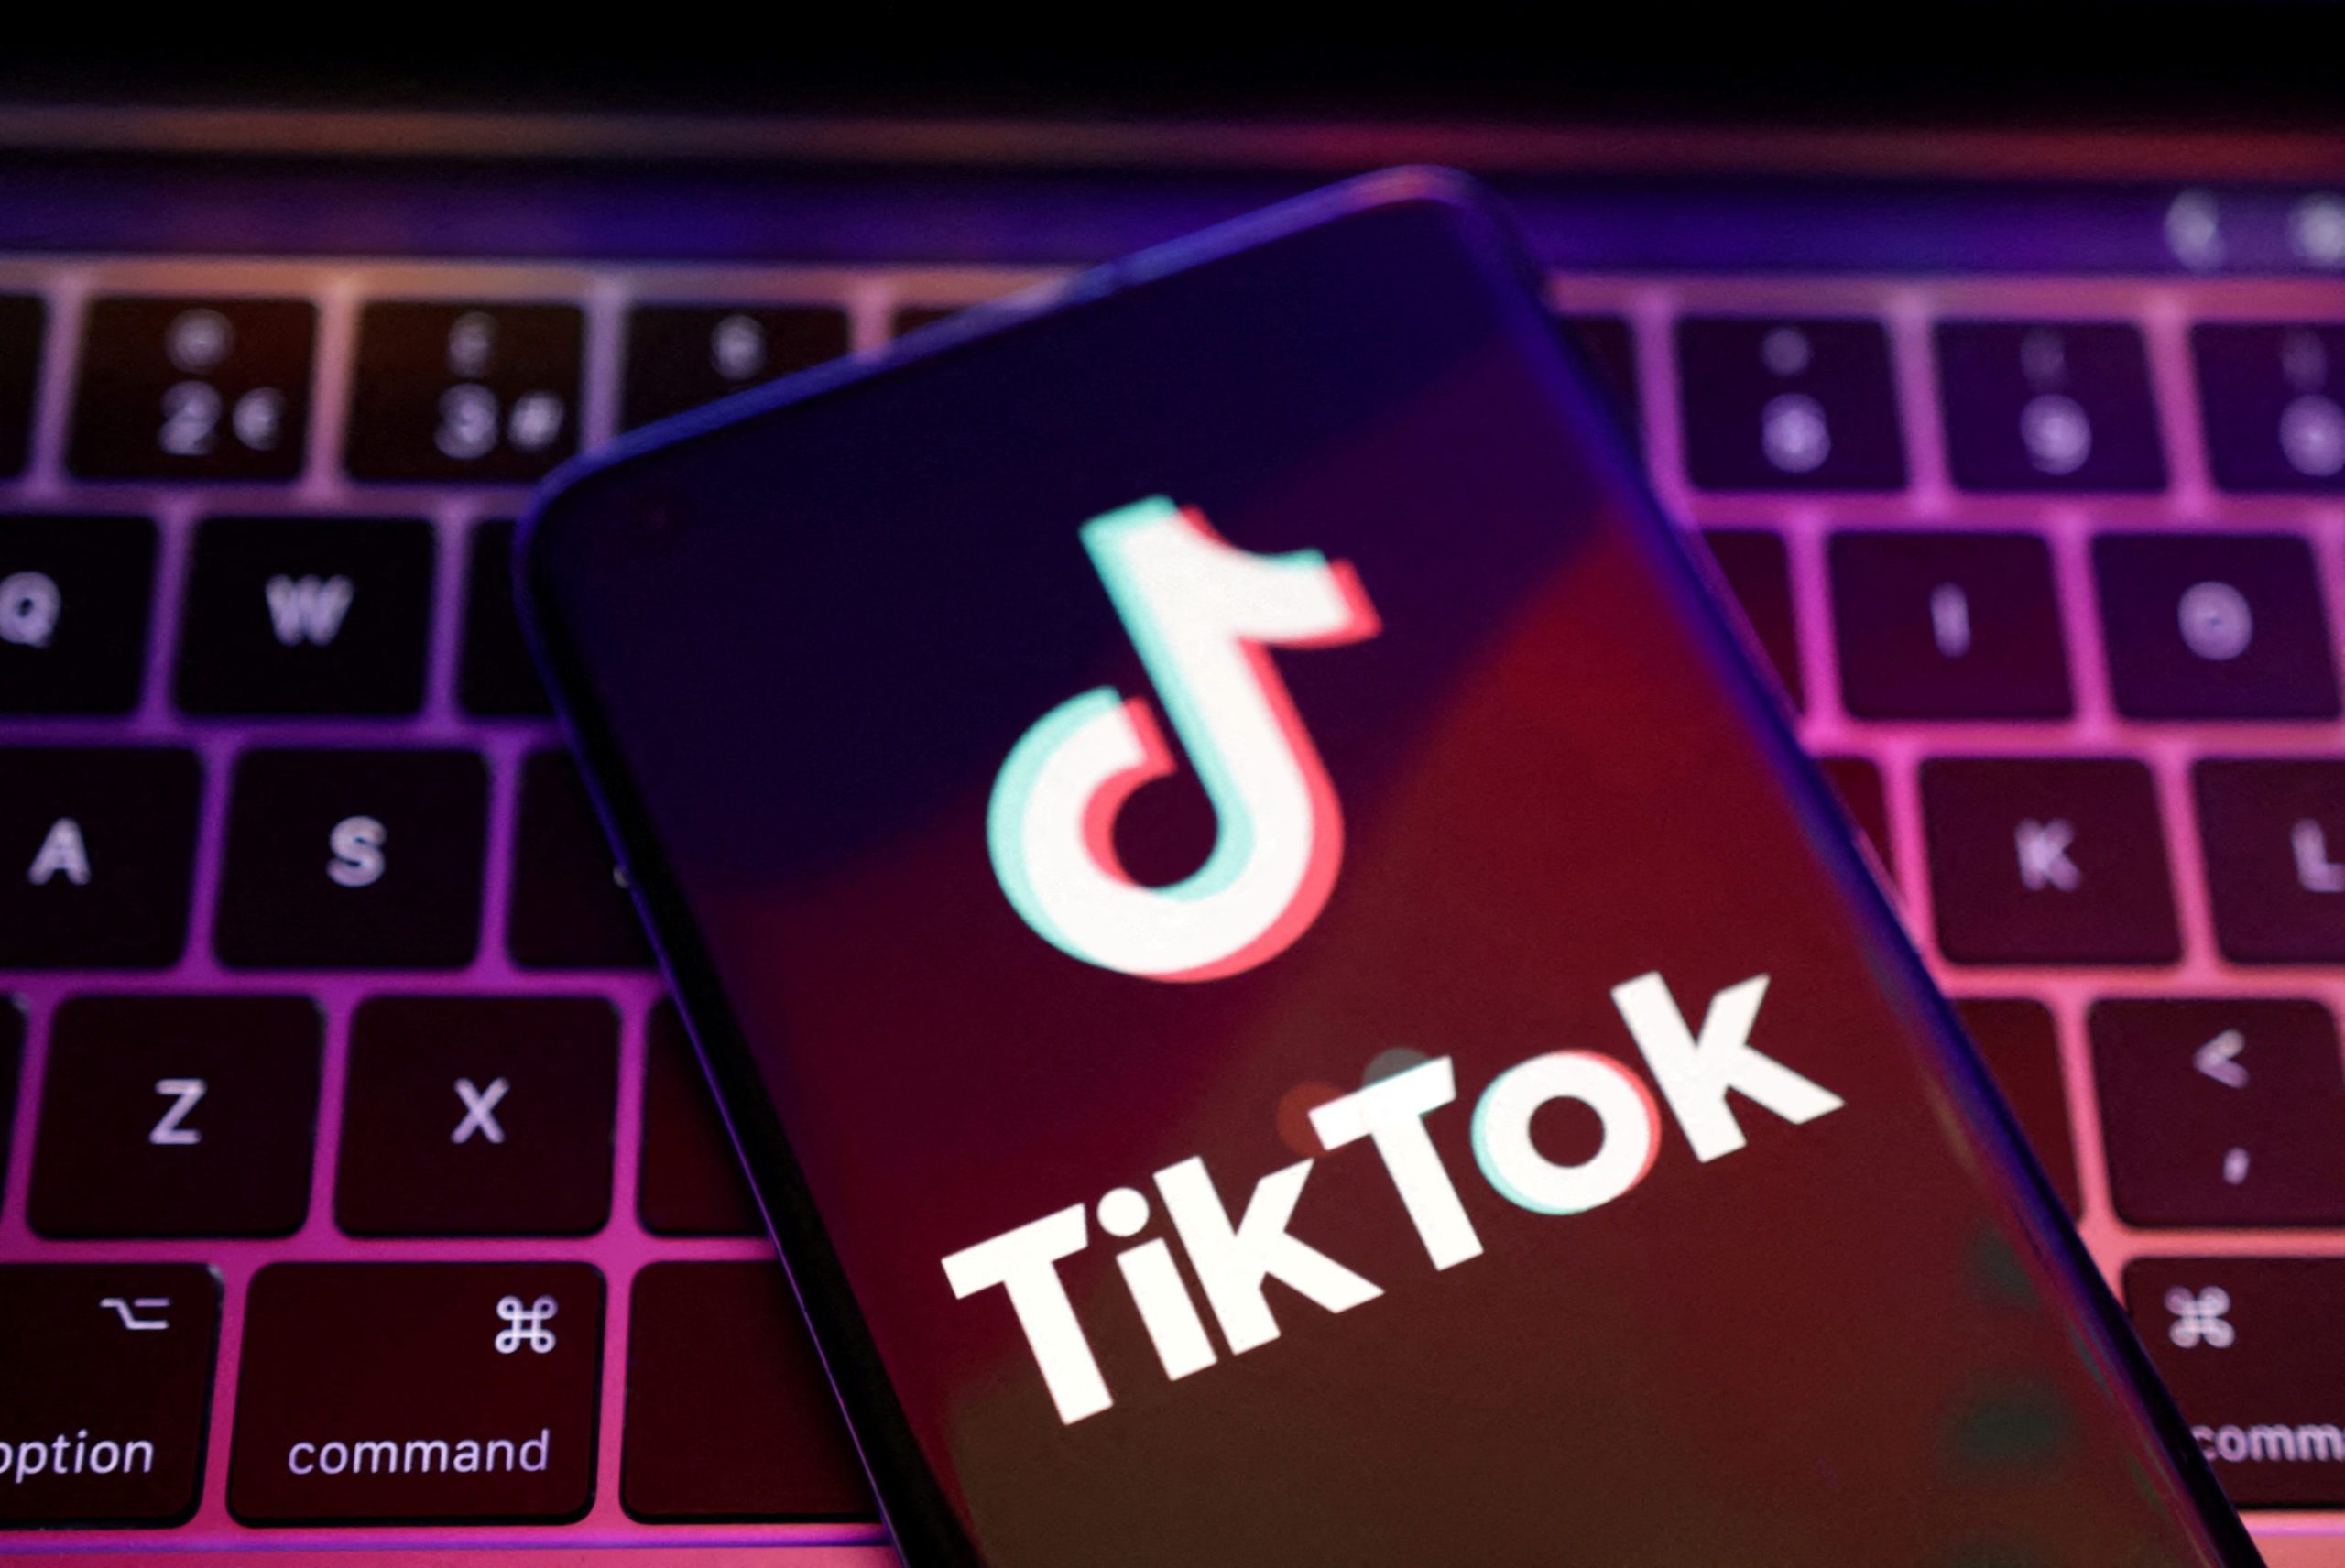 Vietnam to probe TikTok's operations over harmful content from next month